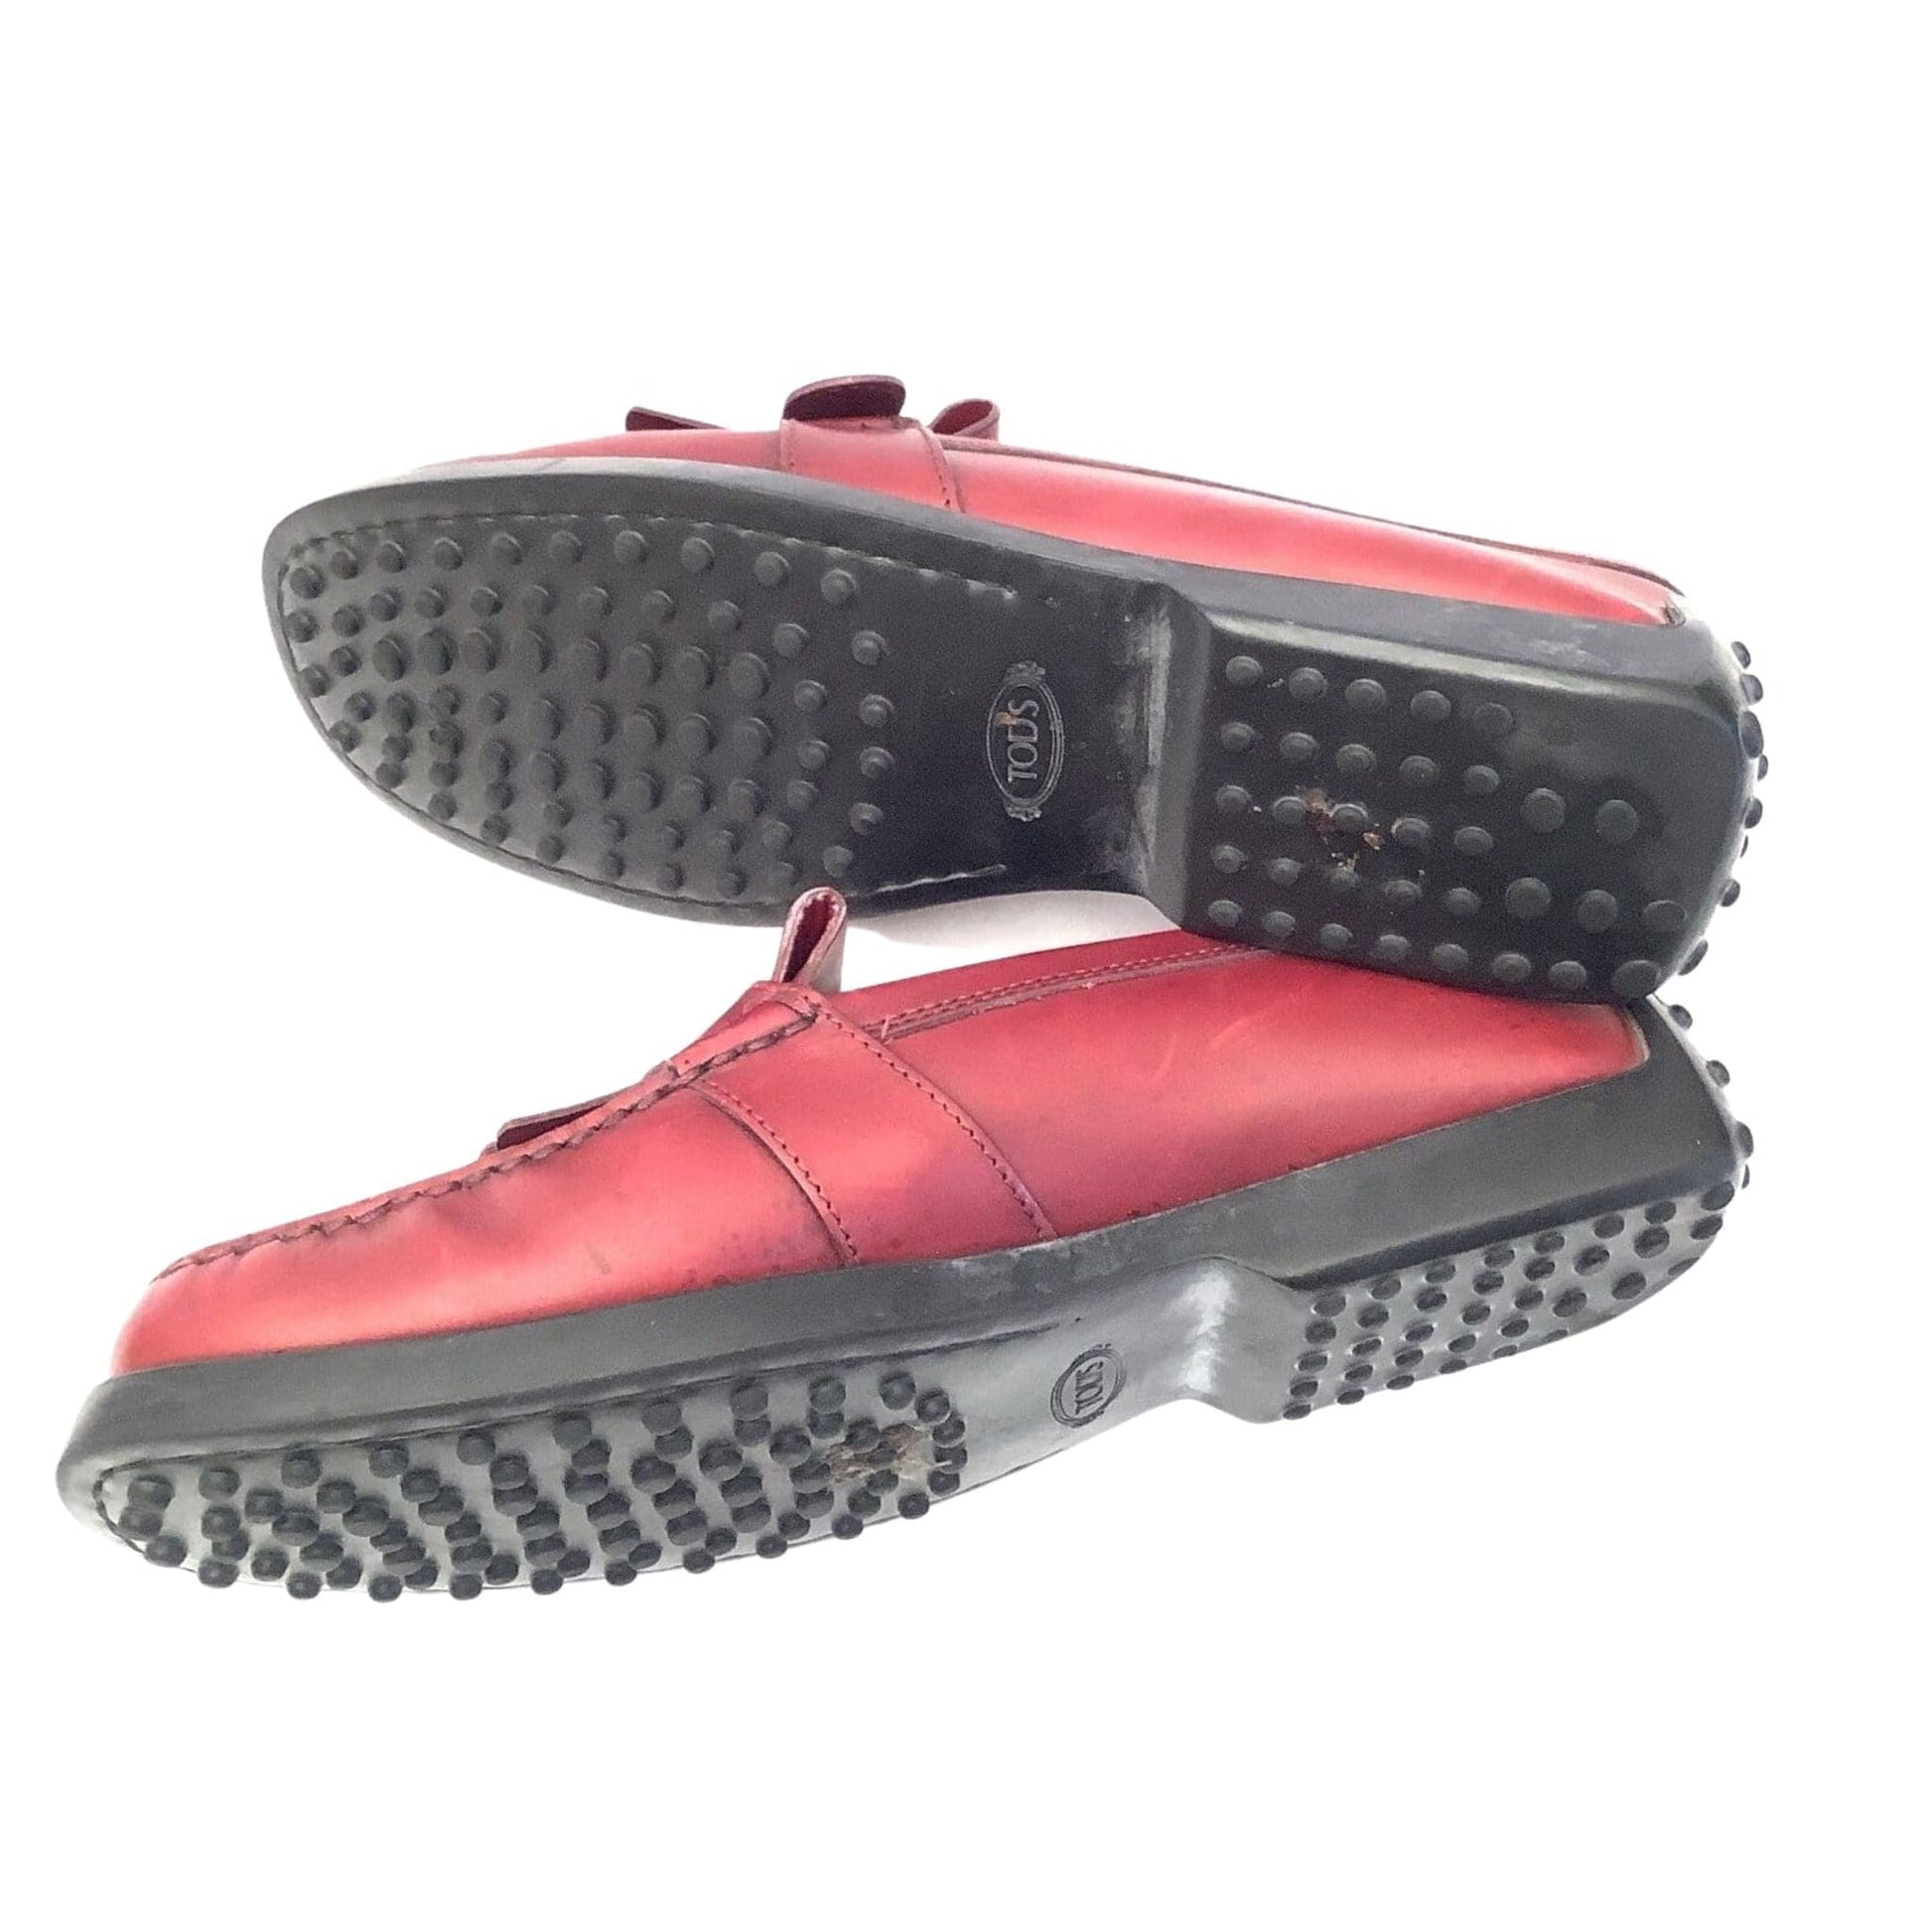 Kiltie Loafer Red Leather 8 / Red / Y2K - Now